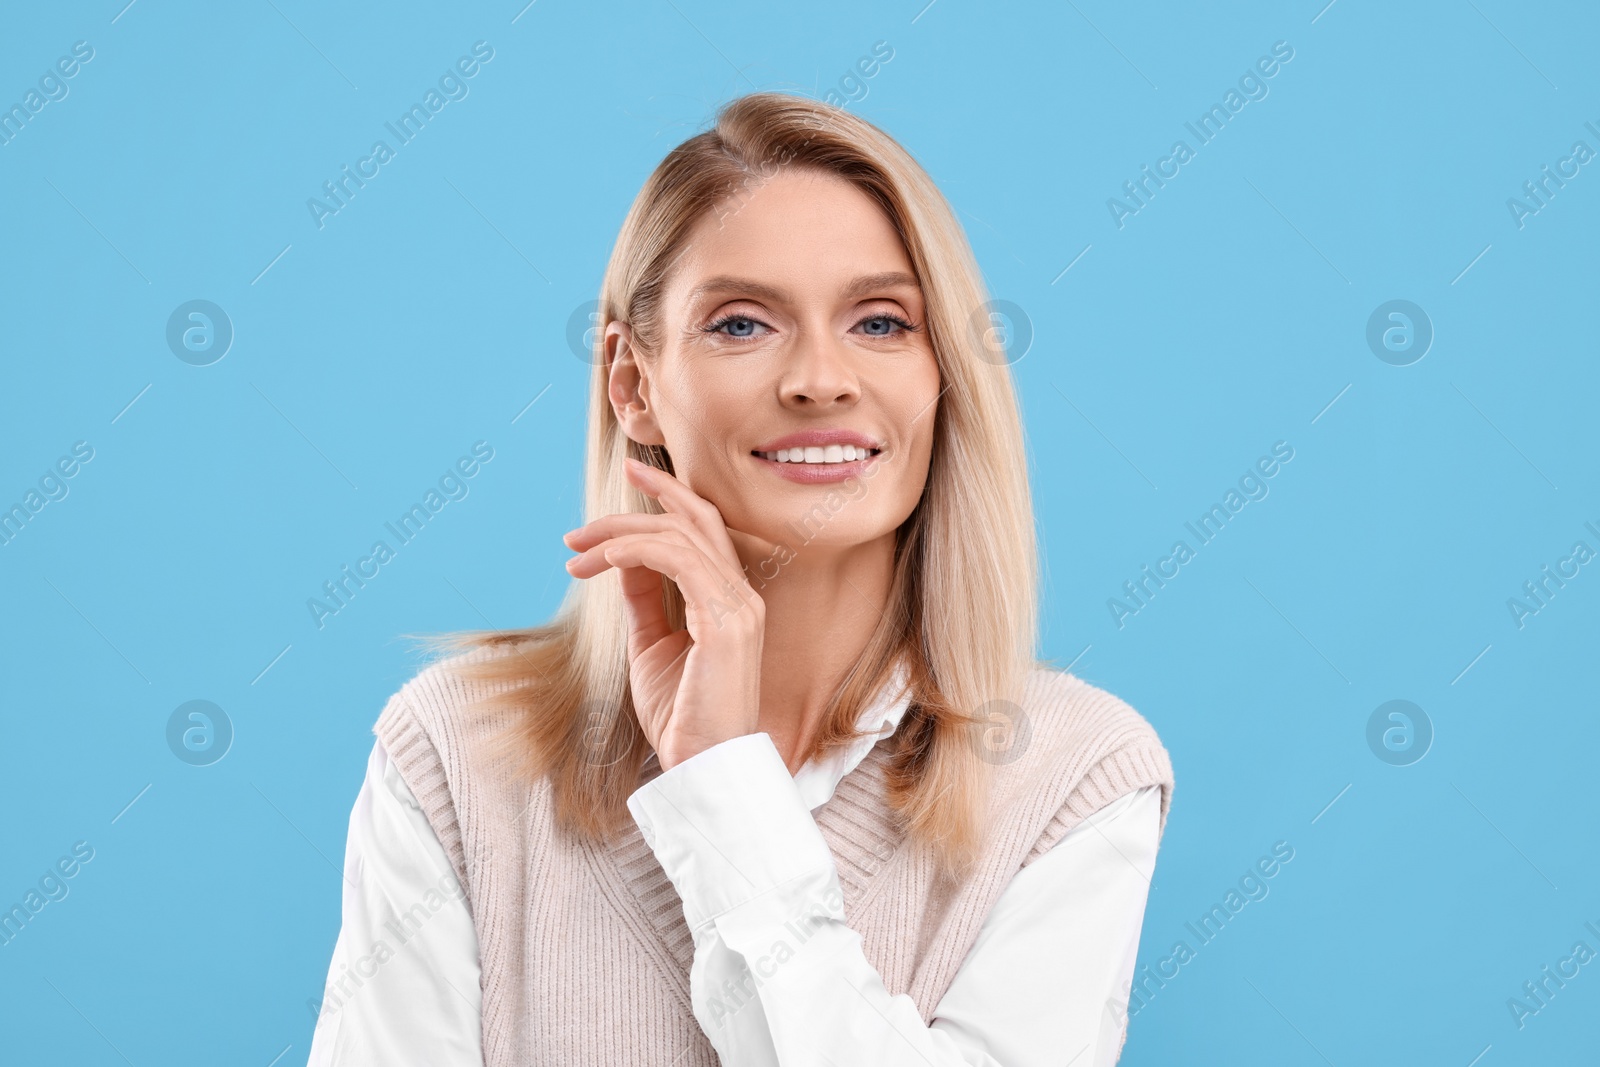 Photo of Portrait of smiling middle aged woman on light blue background